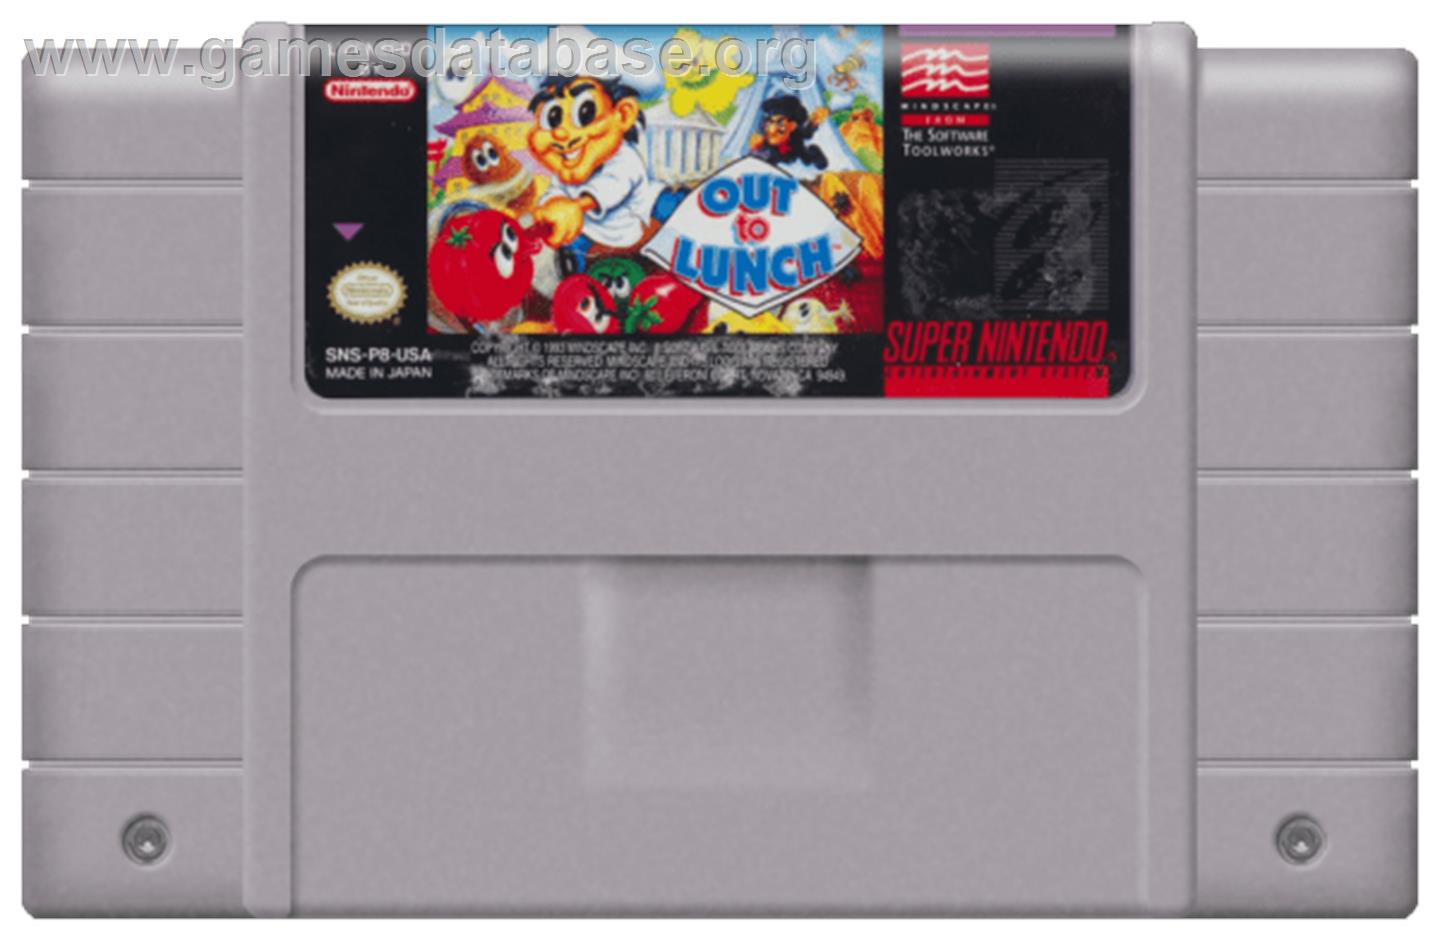 Out to Lunch - Nintendo SNES - Artwork - Cartridge